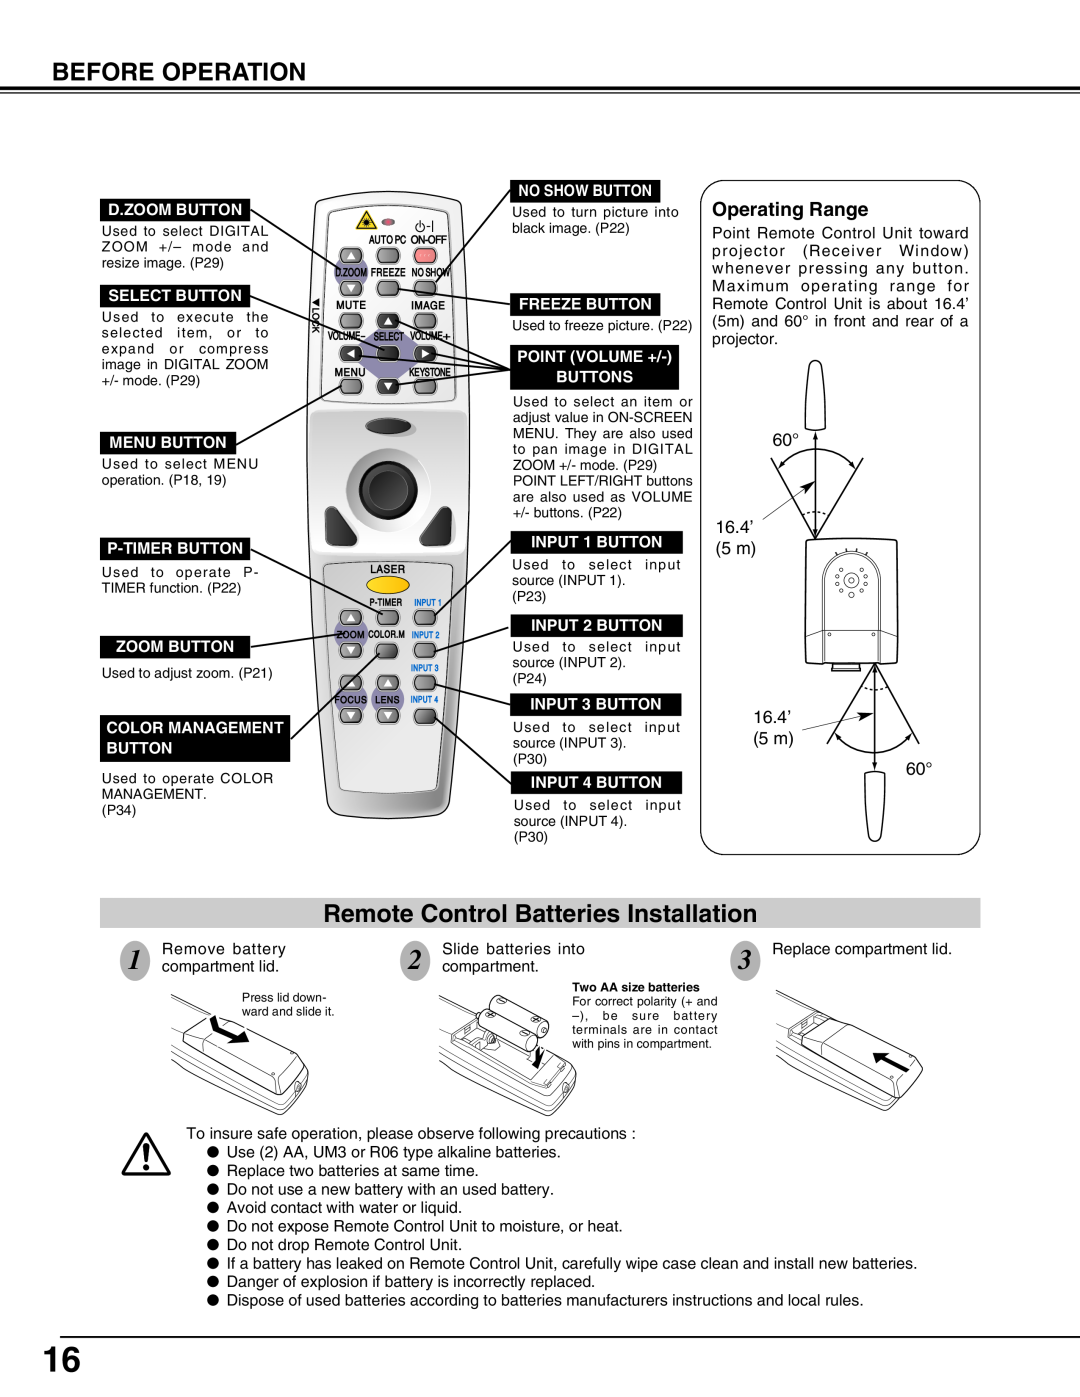 Eiki LC-X50 instruction manual Before Operation, Remote Control Batteries Installation, Operating Range 